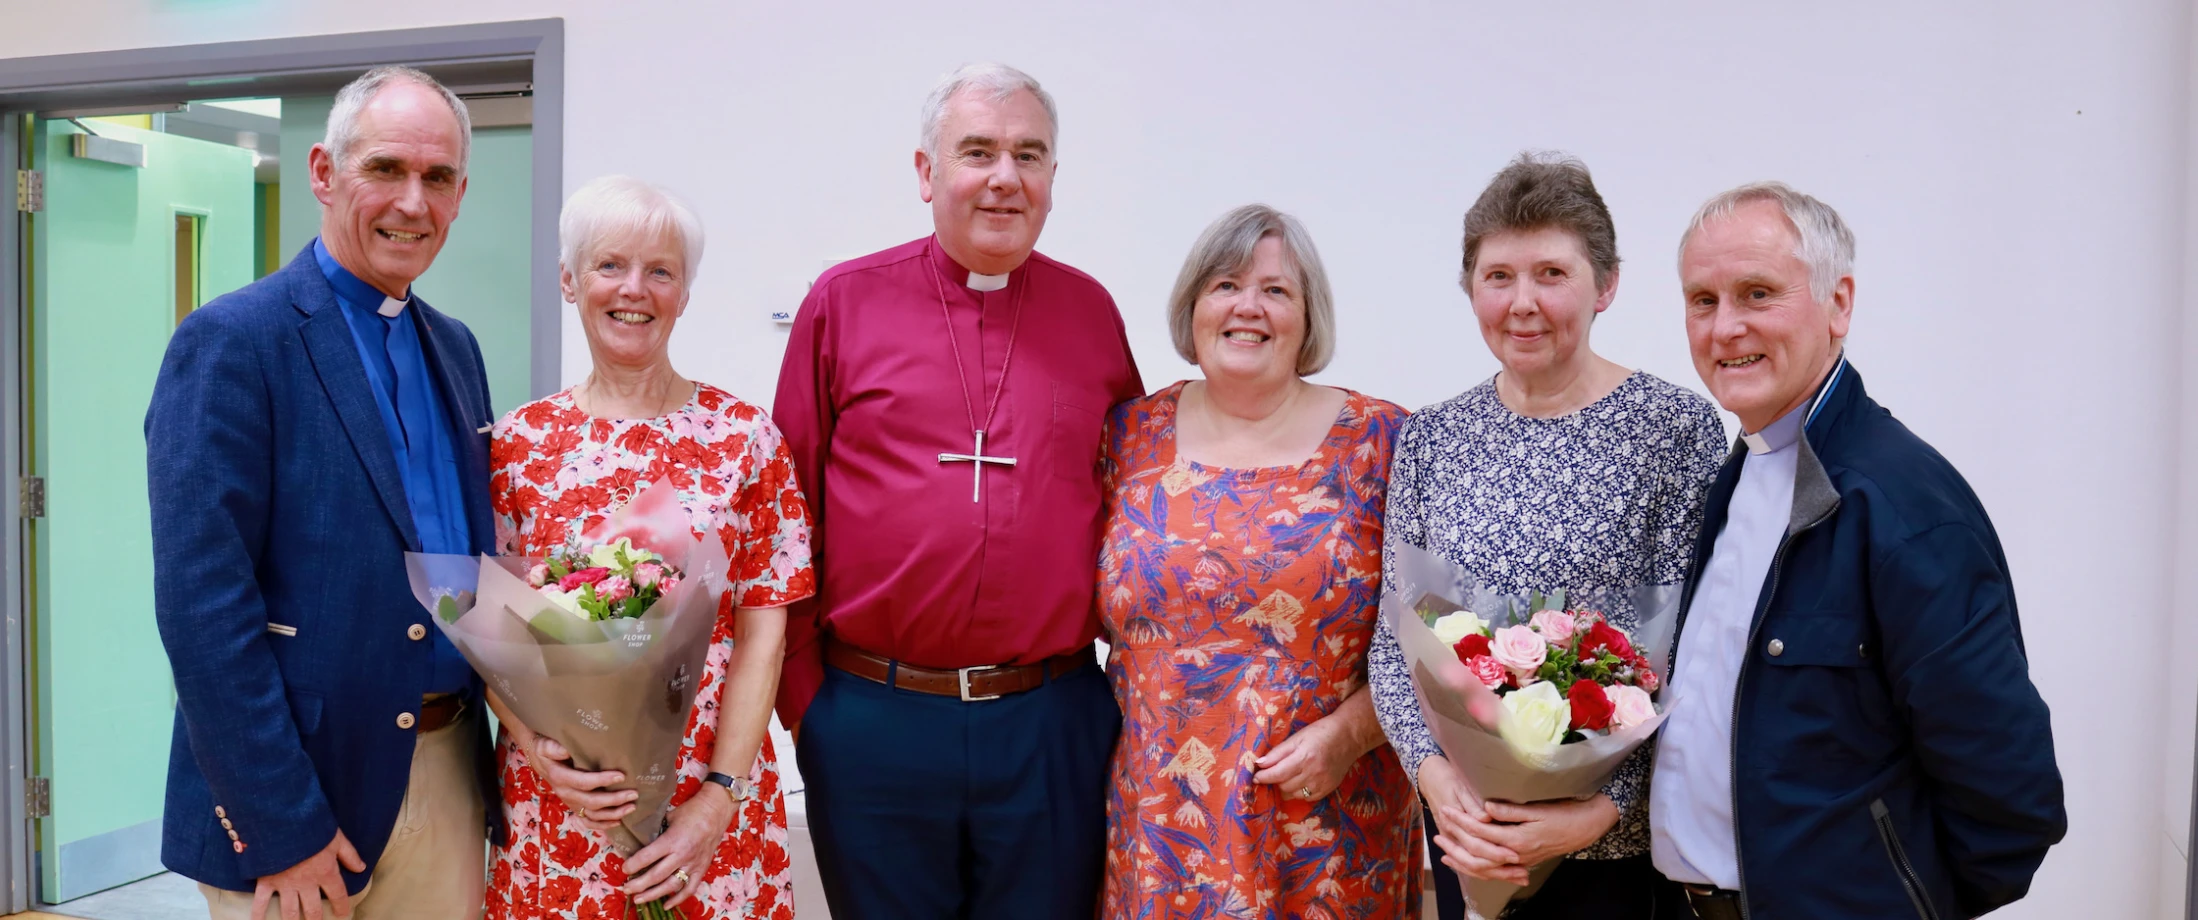 Celebrating our outgoing Archdeacons